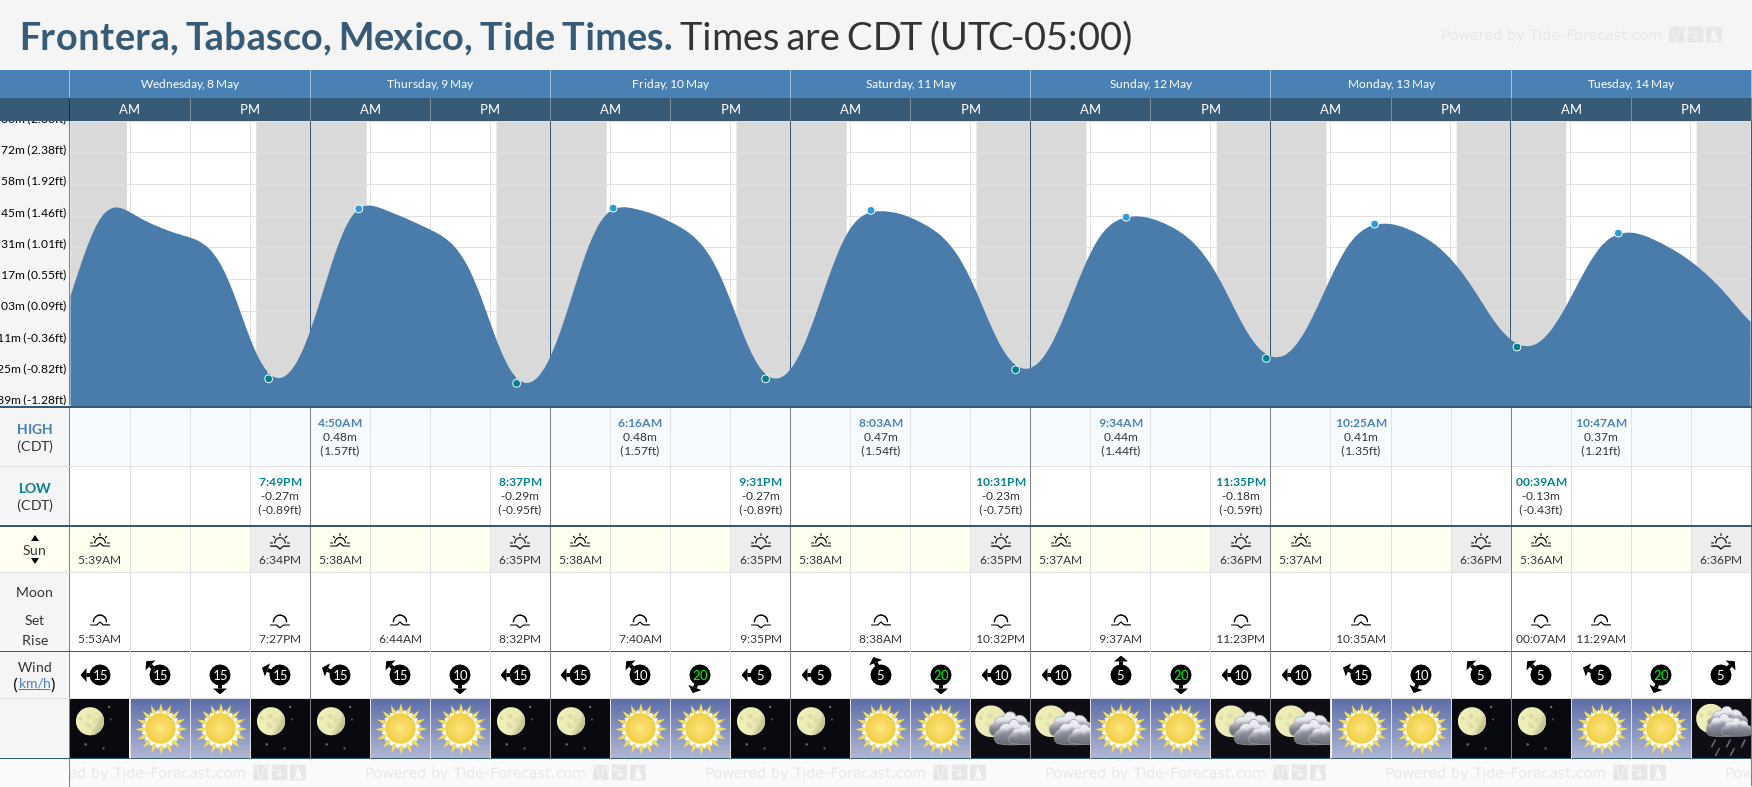 Frontera, Tabasco, Mexico Tide Chart including high and low tide times for the next 7 days